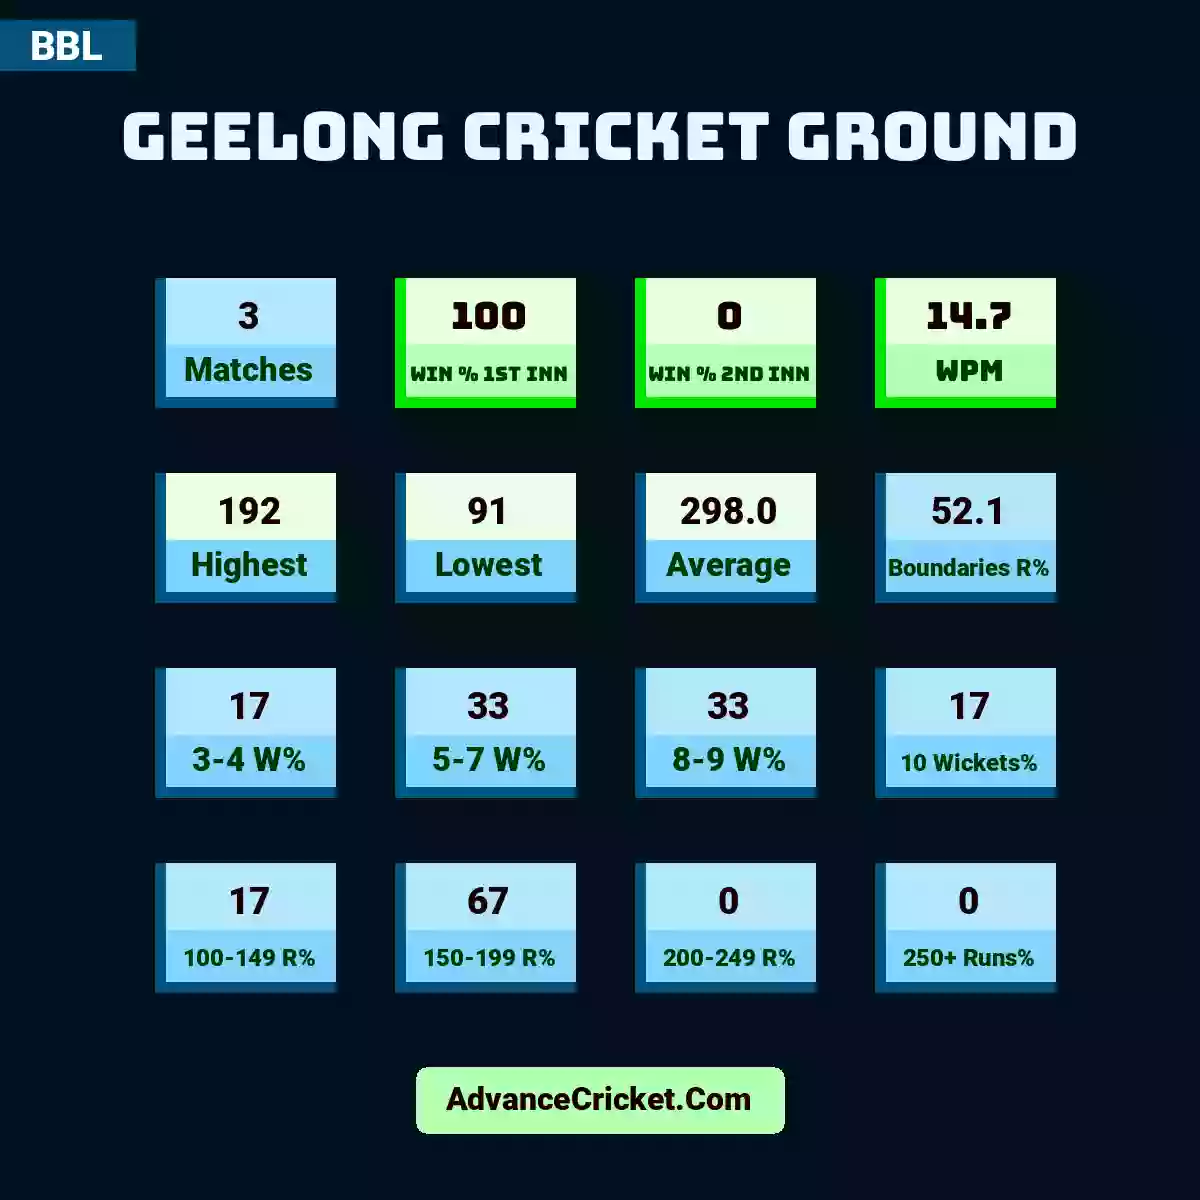 Image showing Geelong Cricket Ground with Matches: 3, Win % 1st Inn: 100, Win % 2nd Inn: 0, WPM: 14.7, Highest: 192, Lowest: 91, Average: 298.0, Boundaries R%: 52.1, 3-4 W%: 17, 5-7 W%: 33, 8-9 W%: 33, 10 Wickets%: 17, 100-149 R%: 17, 150-199 R%: 67, 200-249 R%: 0, 250+ Runs%: 0.